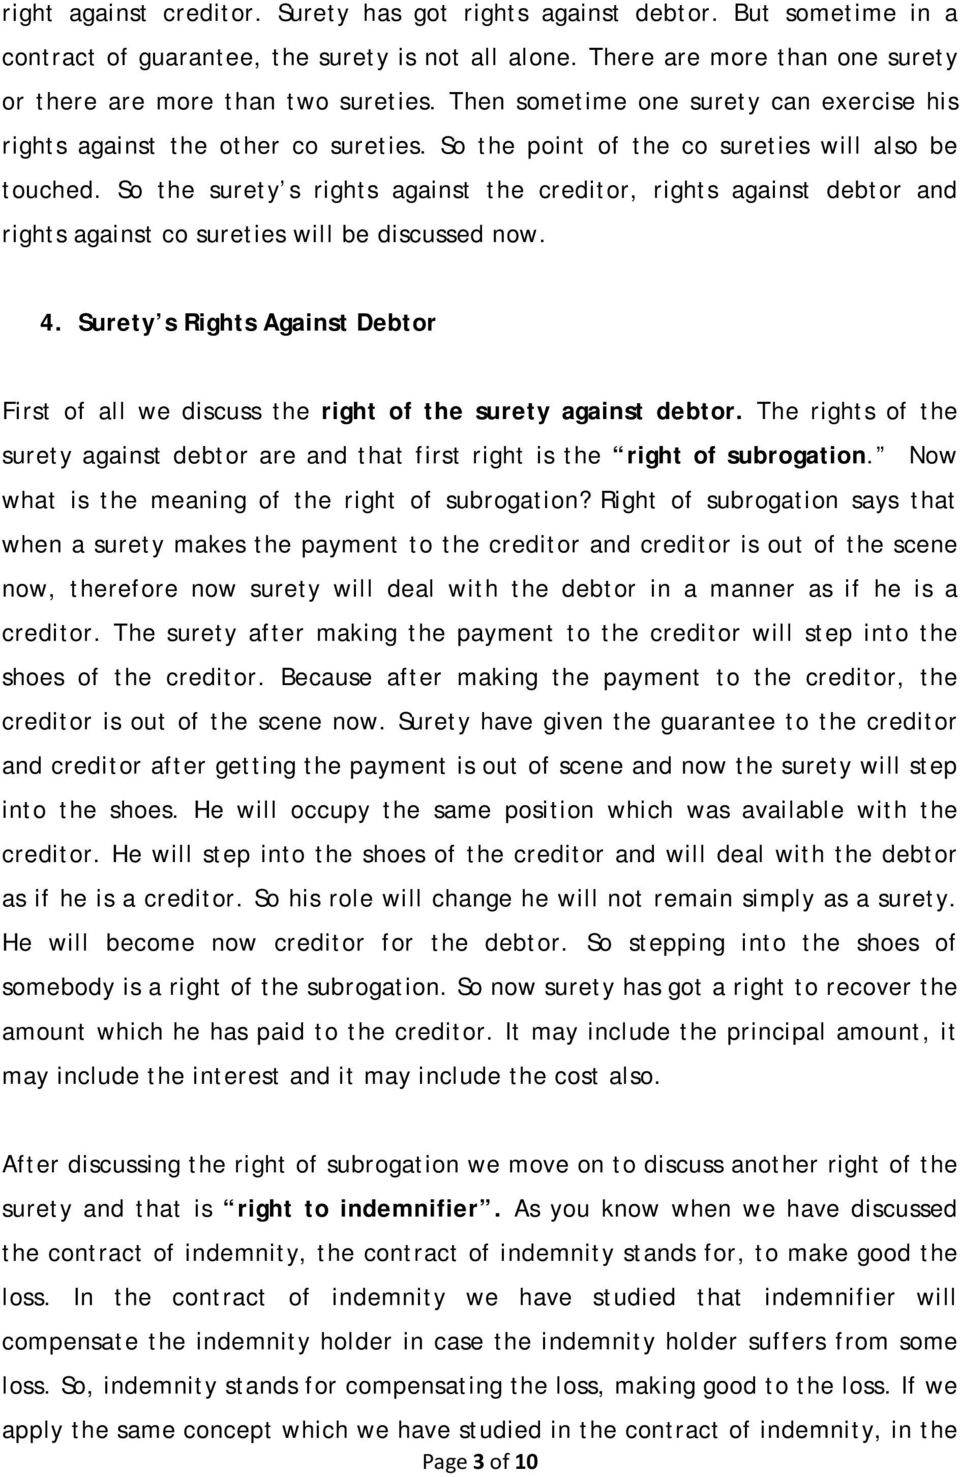 rights and duties of surety